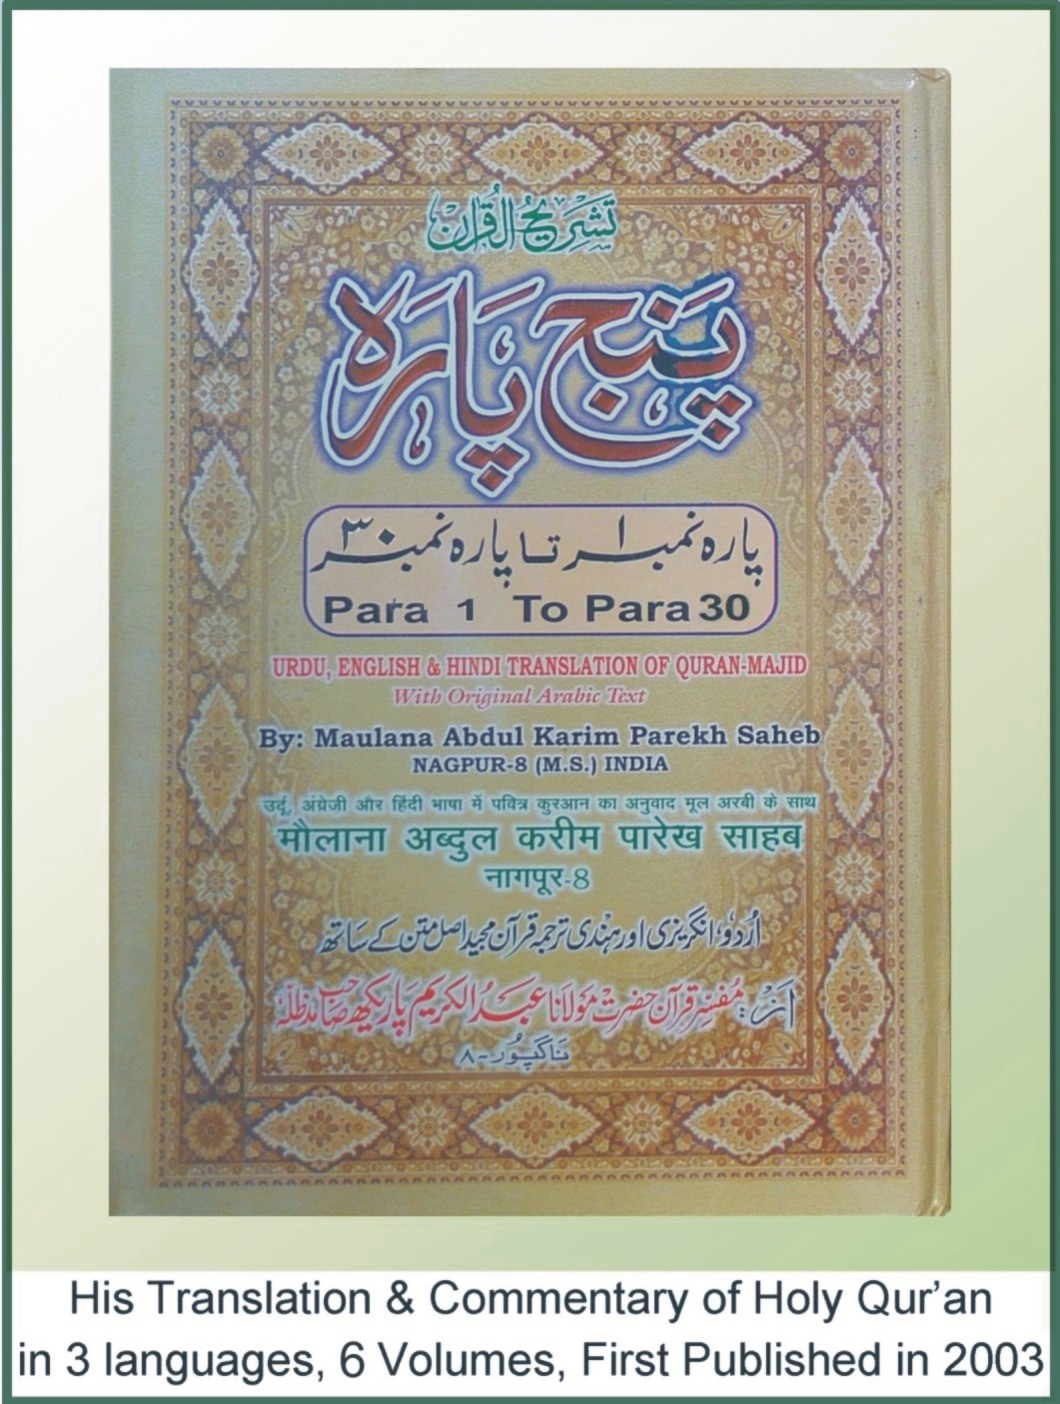 Translation & Commentary of The Holy Qur'an in 3 Languages & 6 Volumes, First Published in 2003